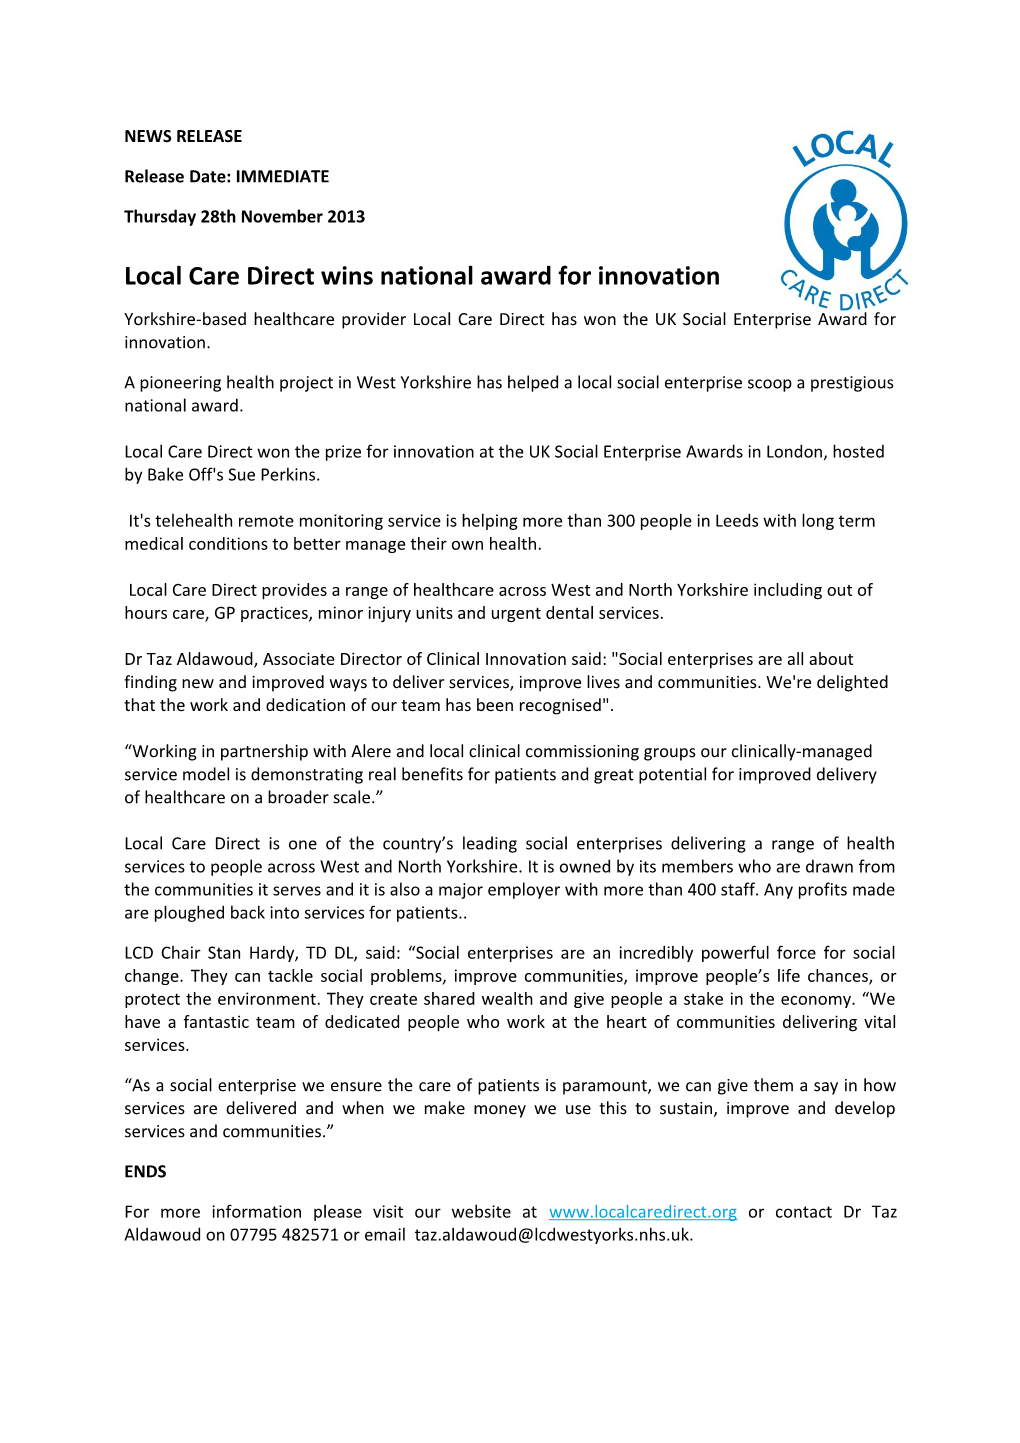 Local Care Direct Wins National Award for Innovation